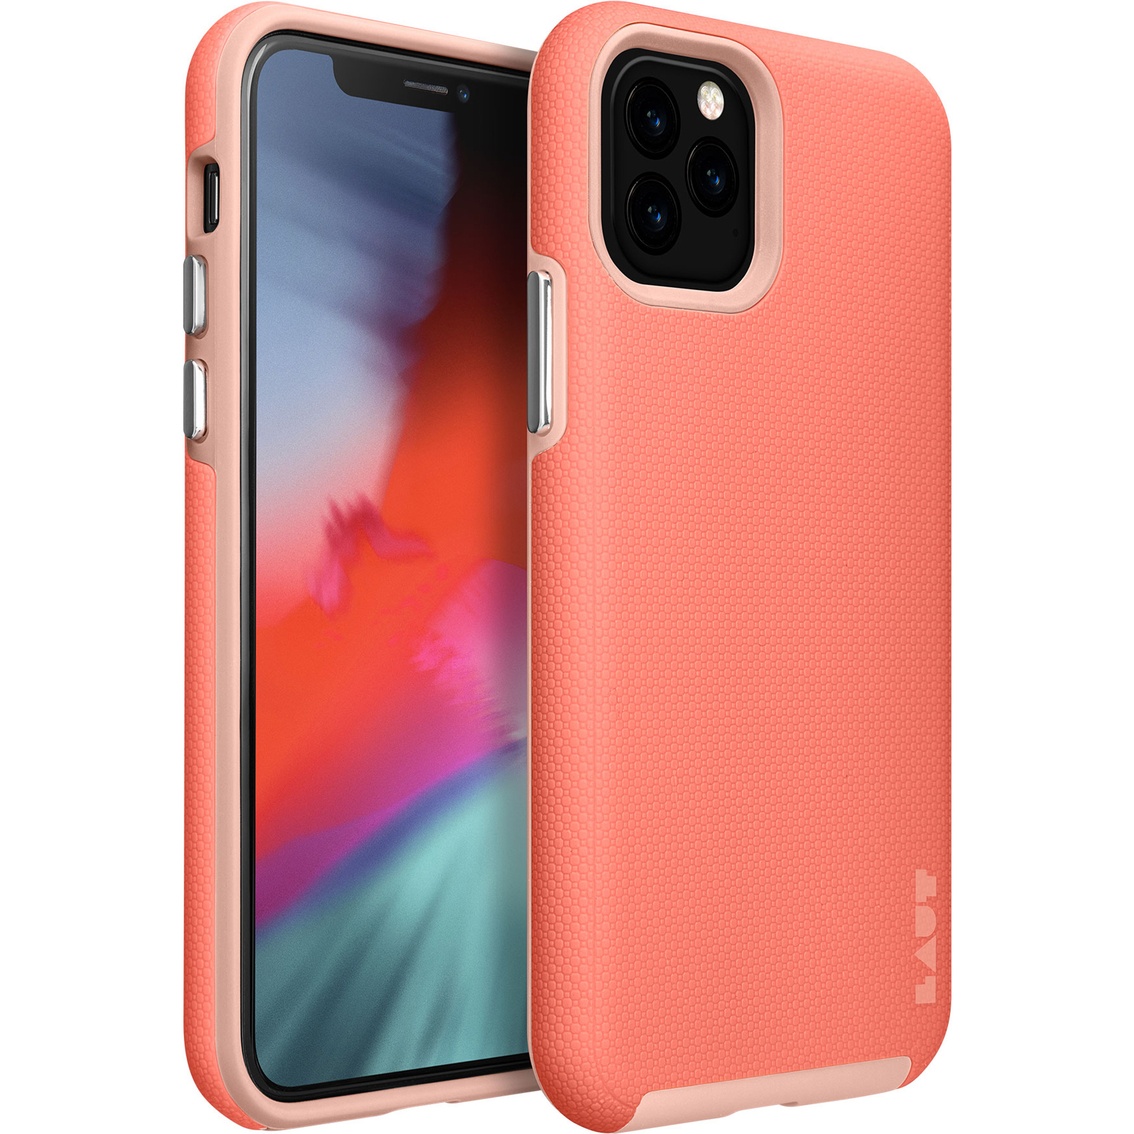 LAUT Design USA SHIELD Case for iPhone 11 - Image 1 of 5